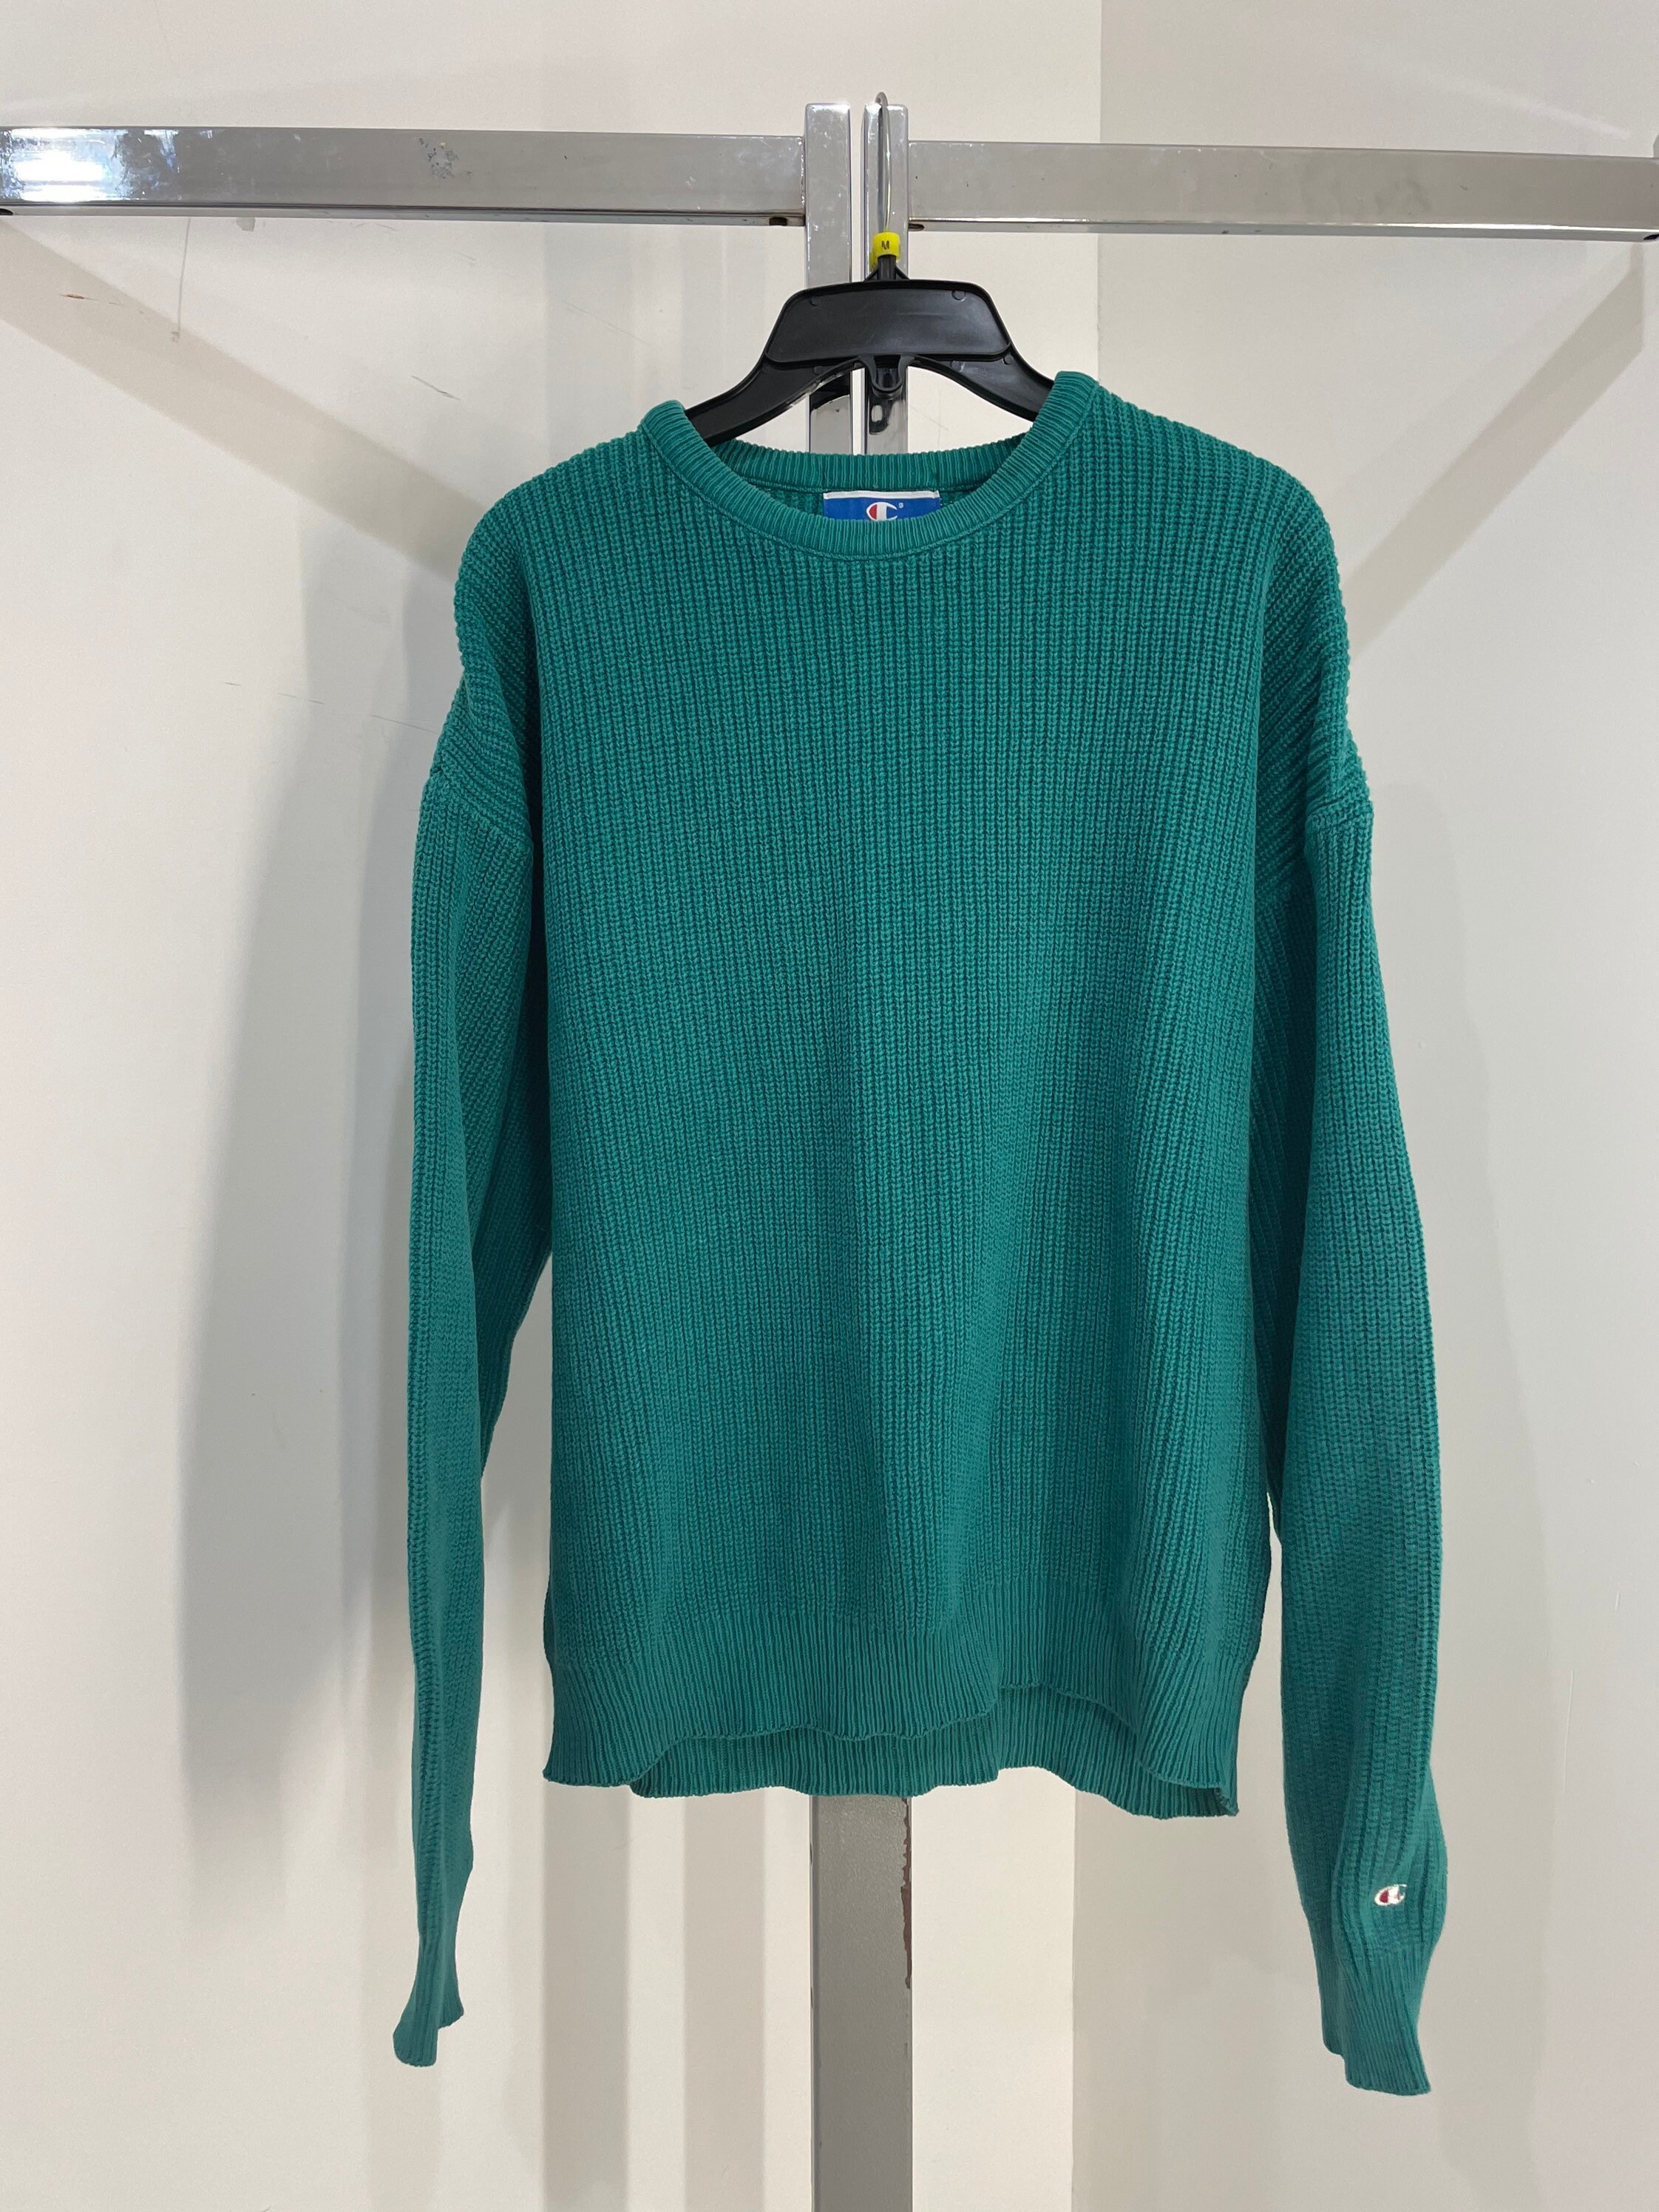 Vintage 90s champion heavy knitted sweater TEAL / L | Etsy